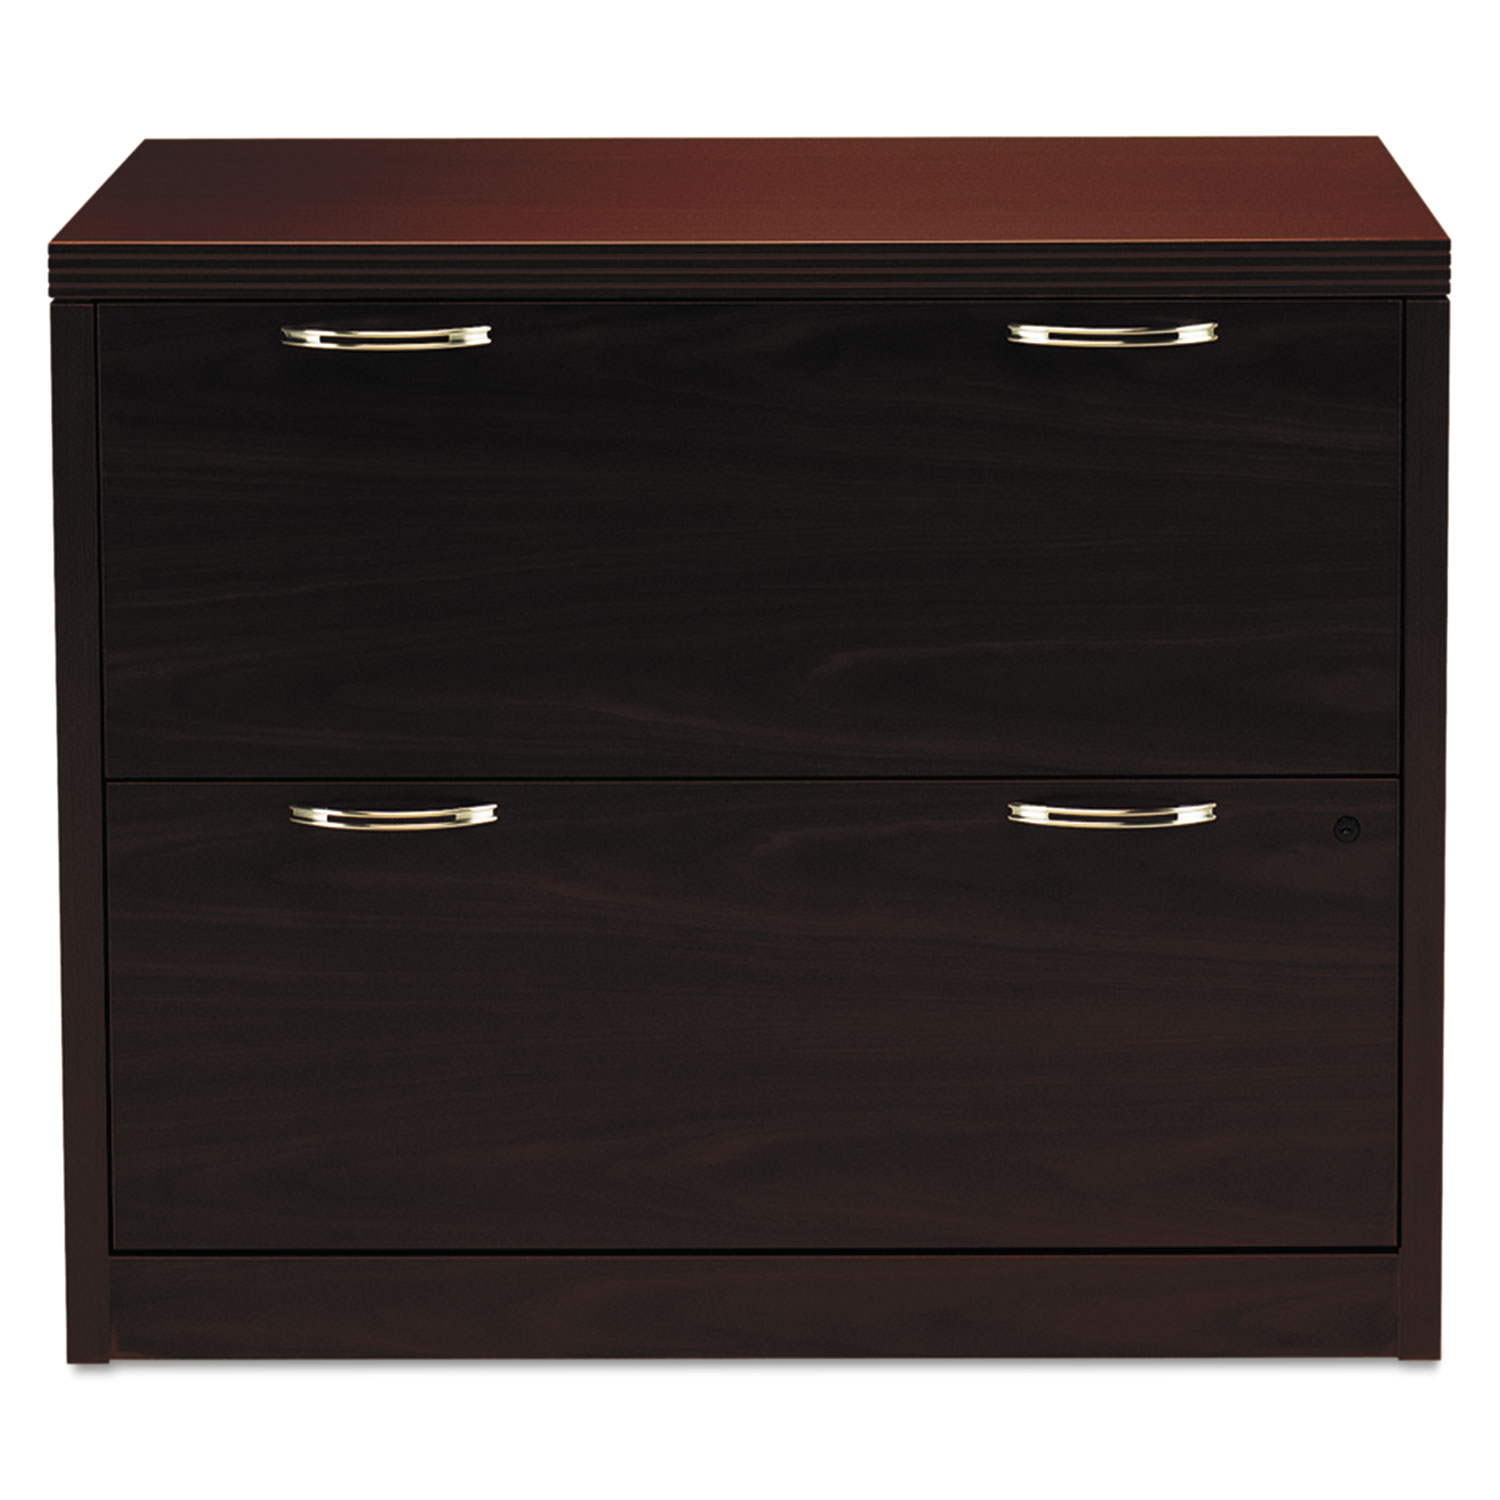 Valido 11500 Series Two-Drawer Lateral File, 36w x 20d x 29 1/2h, Mahogany